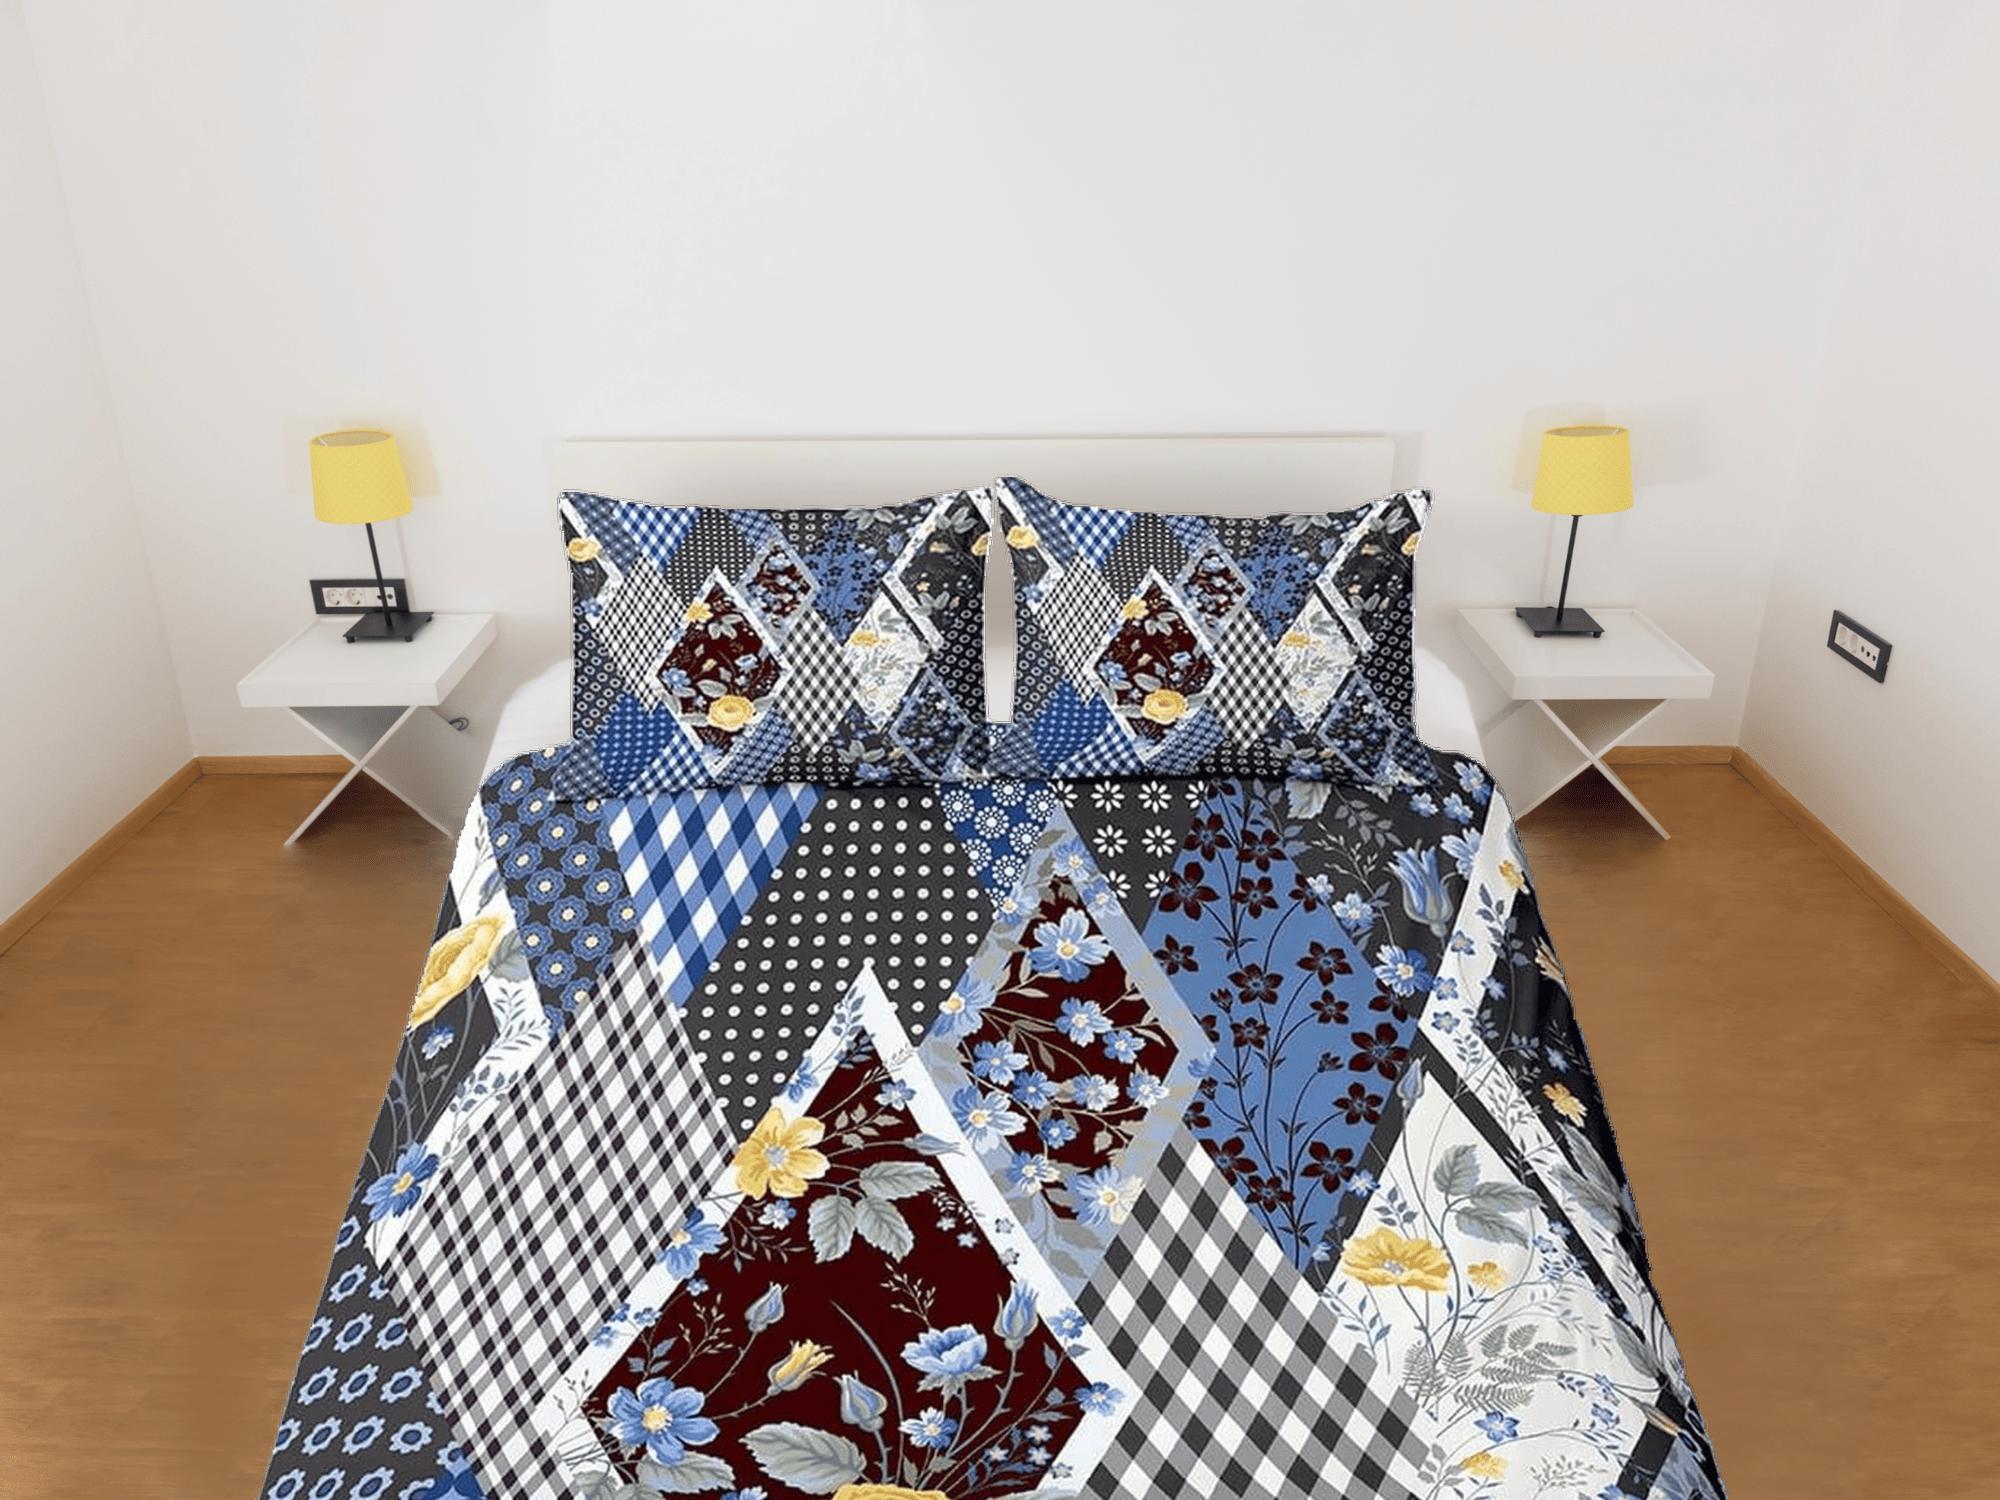 daintyduvet Blue floral and plaid patchwork quilt printed duvet cover set, aesthetic room bedding set full, king, queen size, boho bedspread shabby chic